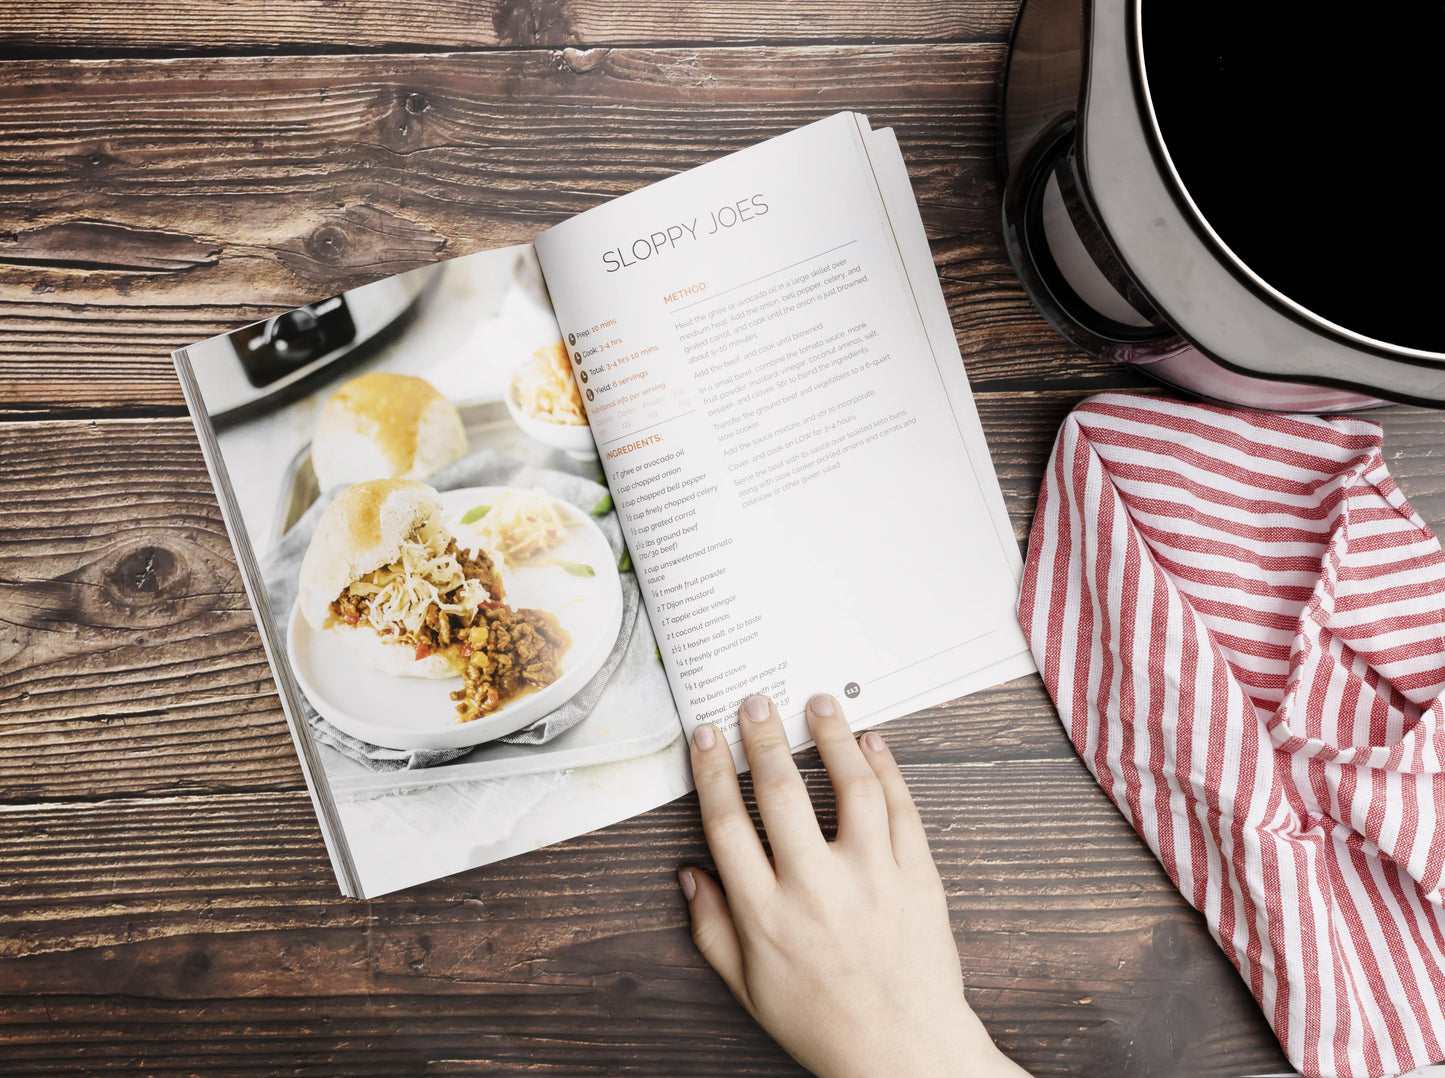 An opened Keto slow cookbook laid on a wooden surface. Cooking utensil and a kitchen cloth can be seen.